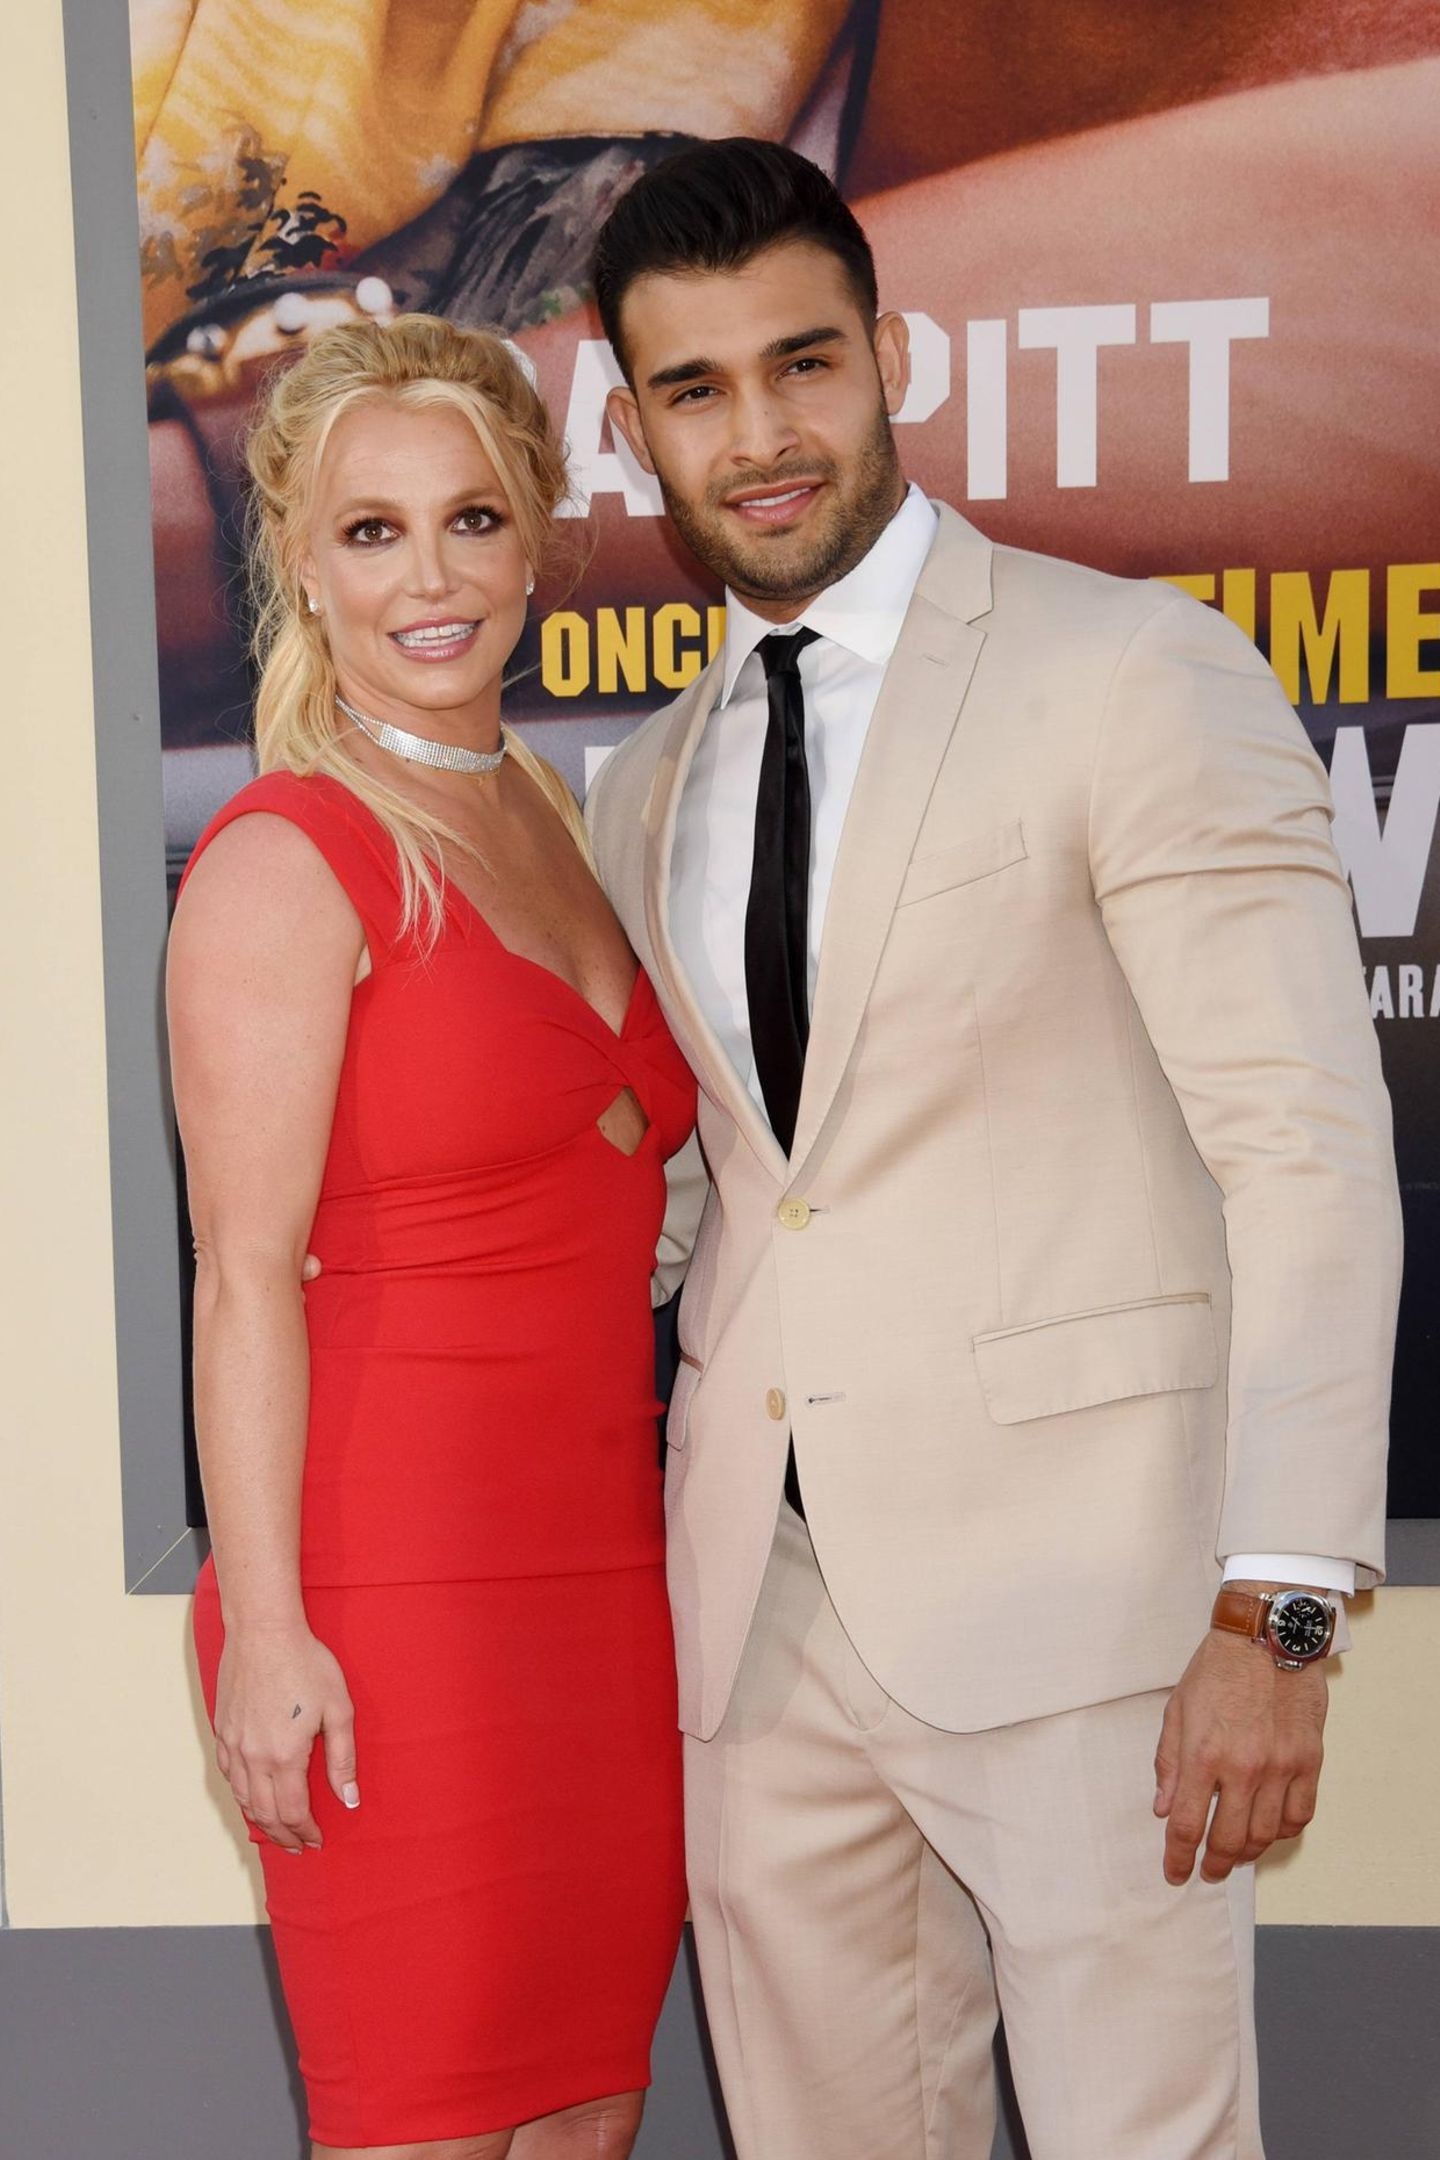 Sam Asghar and Britney Spears: A personal trainer, model and actor, married to an American singer. 1440x2160 HD Wallpaper.